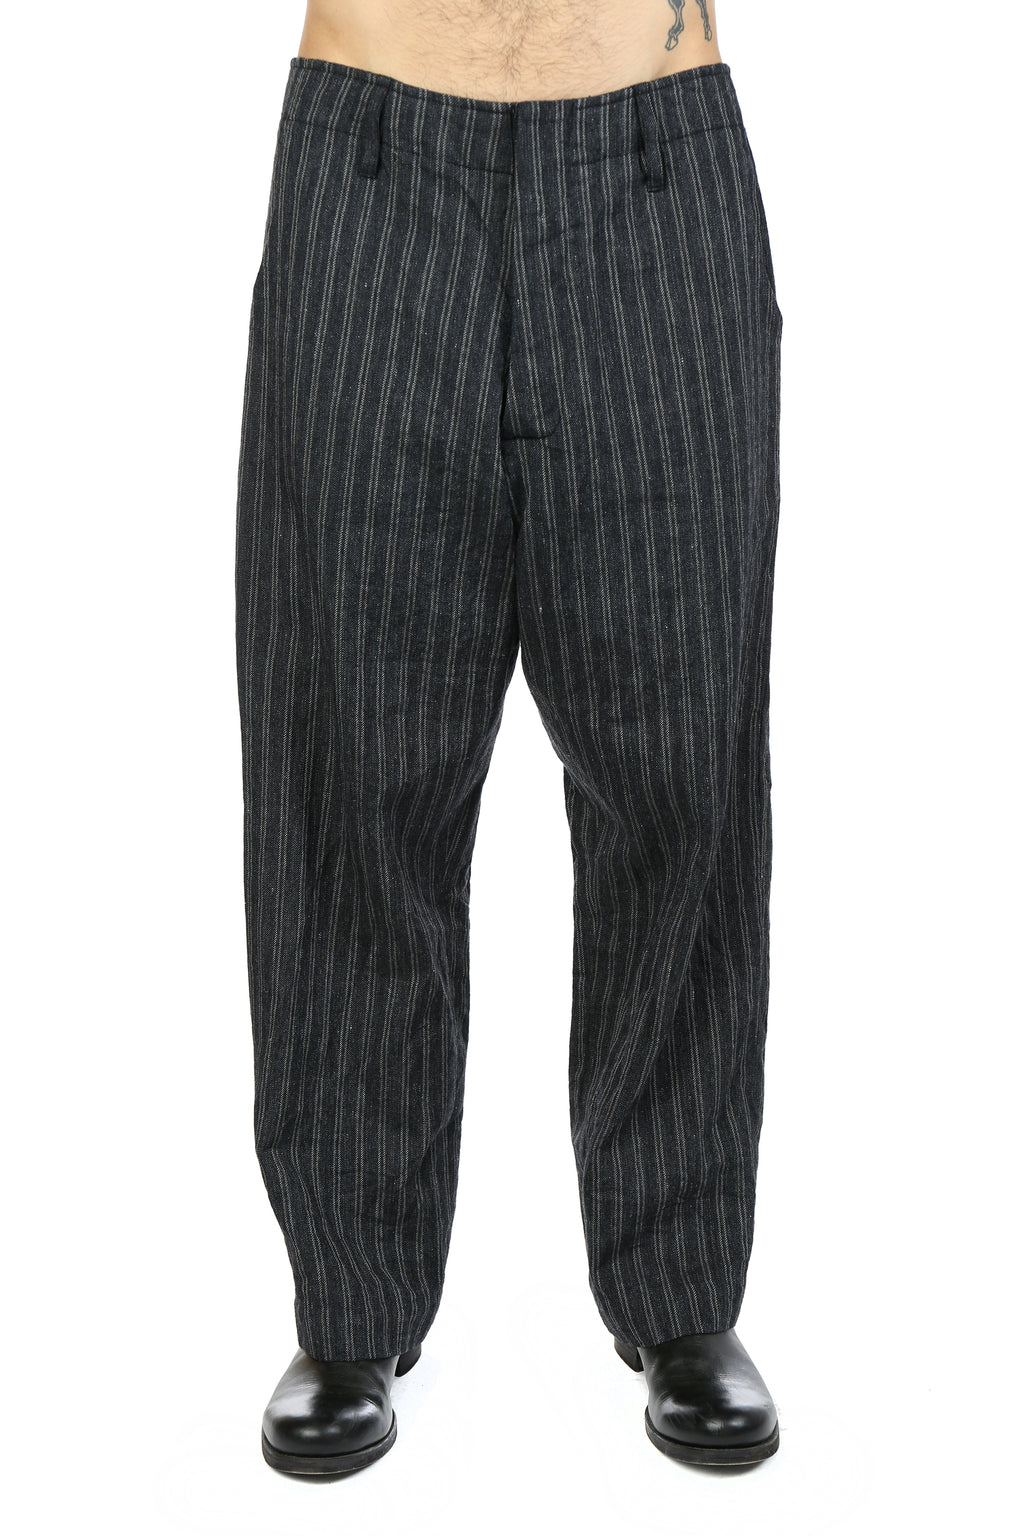 GEOFFREY B SMALL Men Handmade 1940'S Reproduction Work Trousers